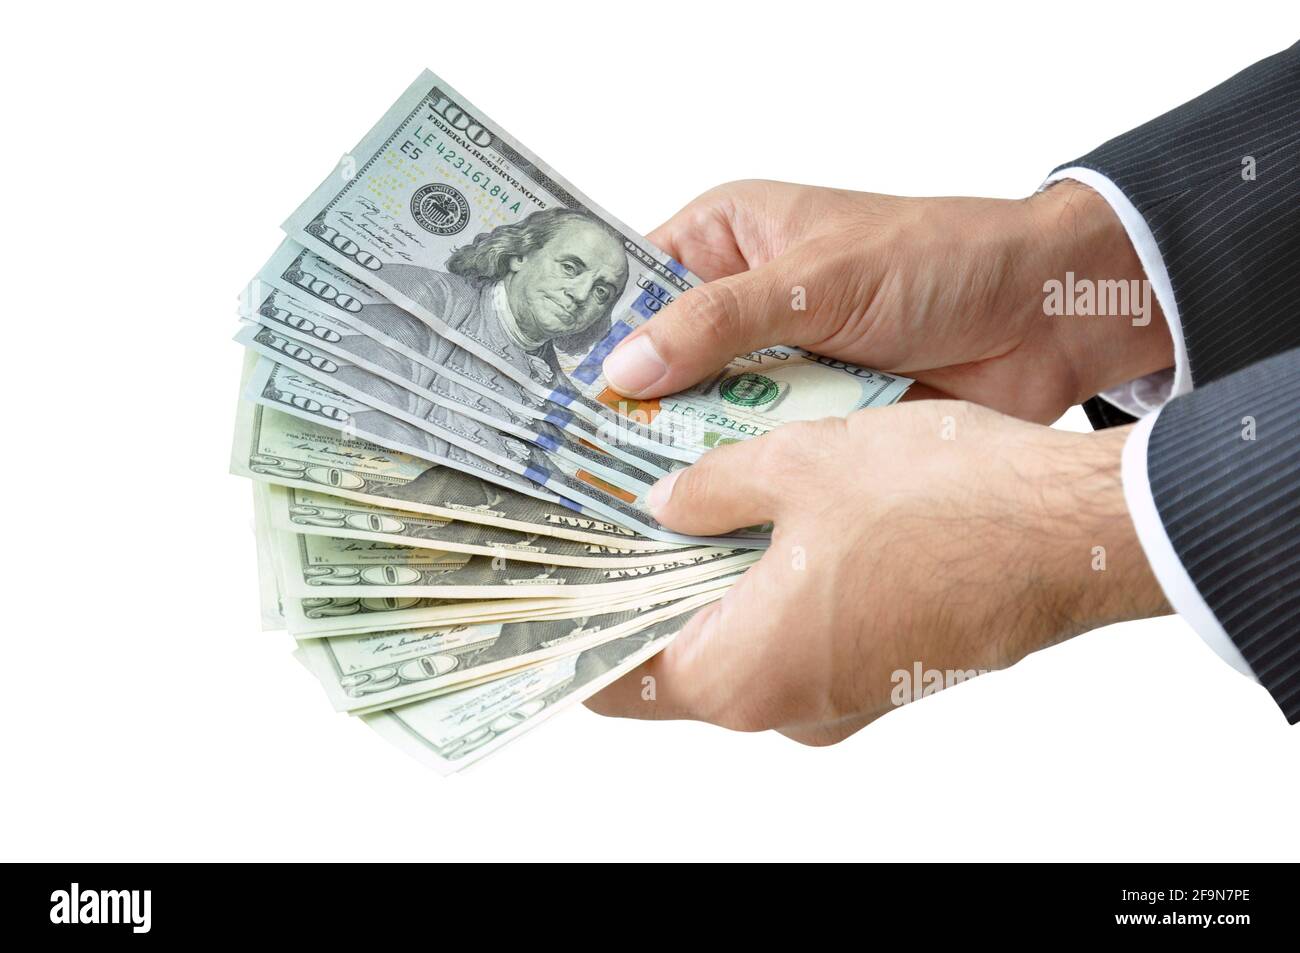 Money - hands holding banknotes  (United States Dollars or USD) on white background Stock Photo